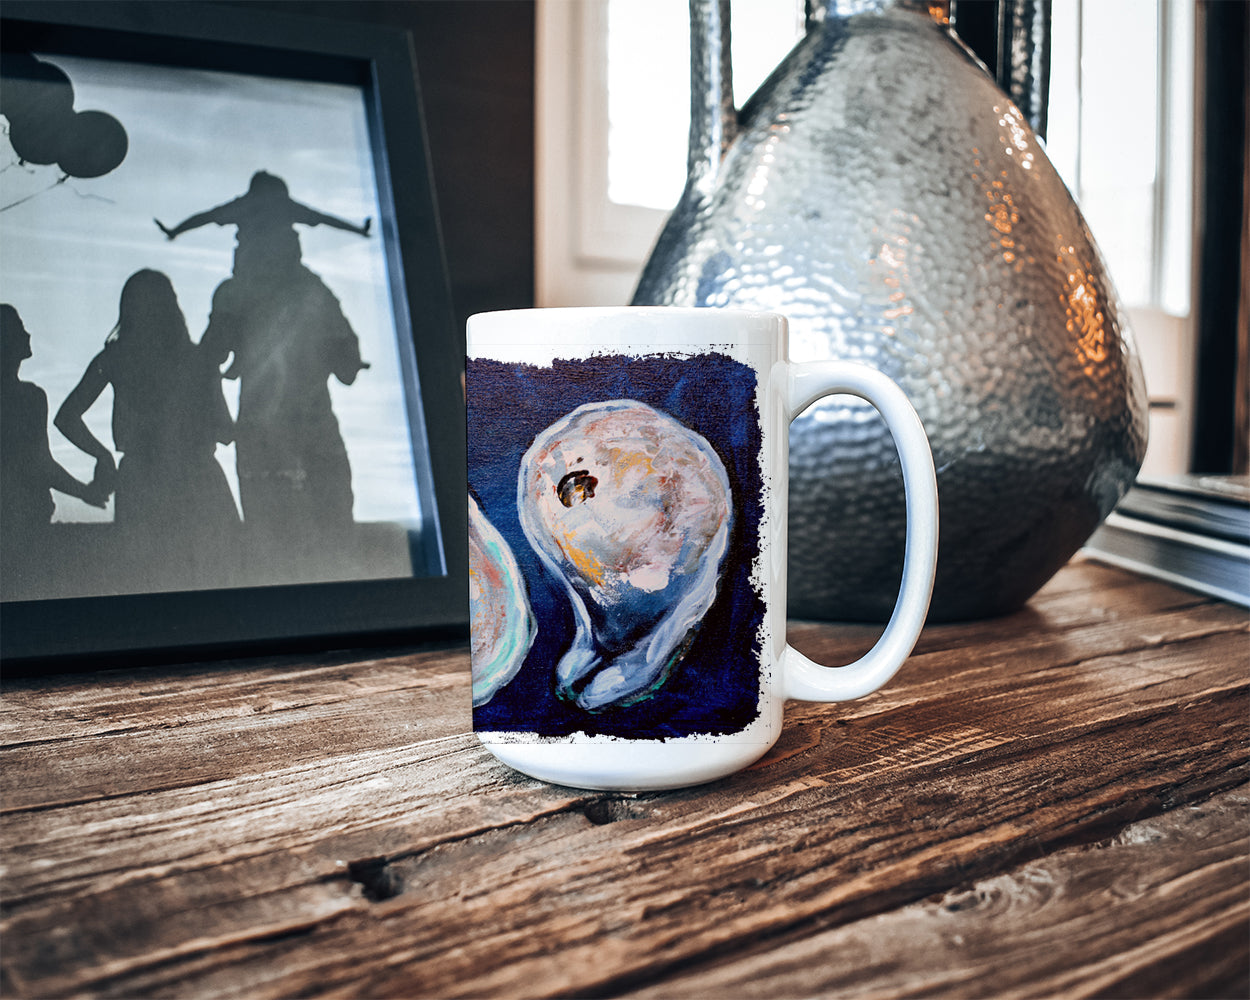 Oysters Give Me More Dishwasher Safe Microwavable Ceramic Coffee Mug 15 ounce MW1112CM15  the-store.com.